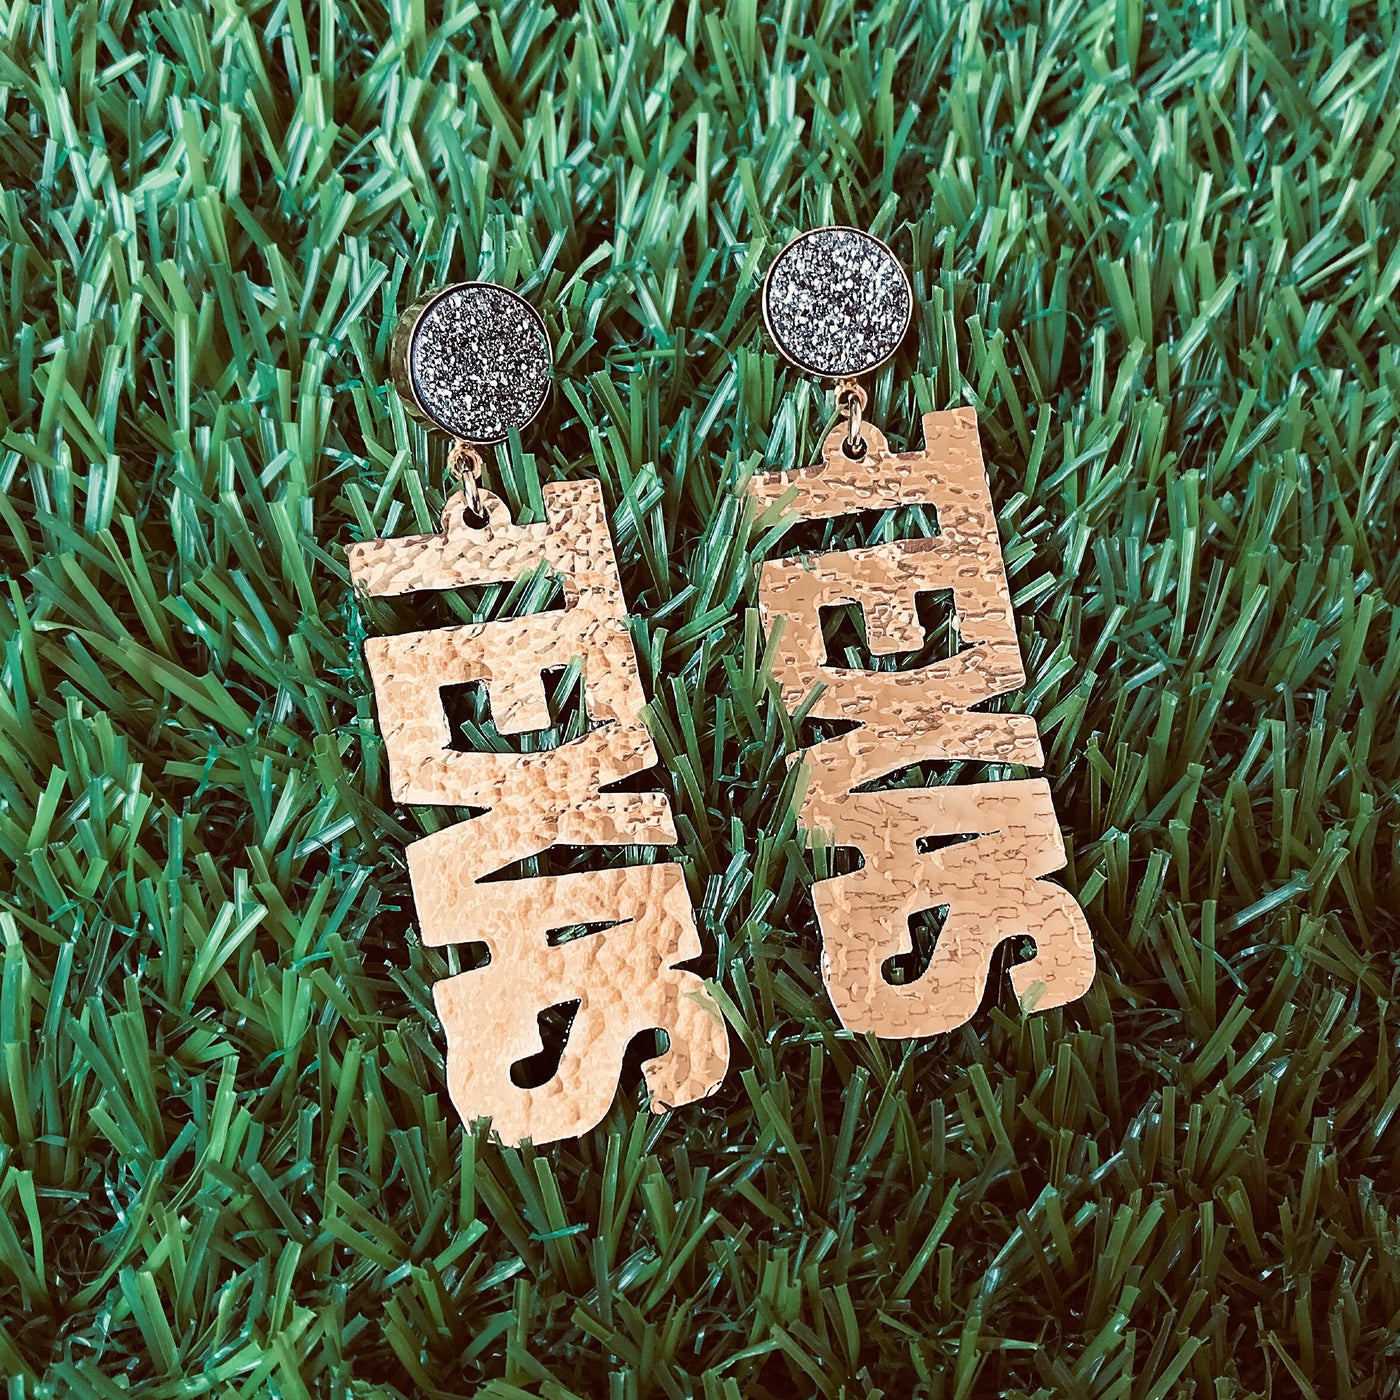 Texas Proud Gold "Texas" Earrings with Silver Druzy